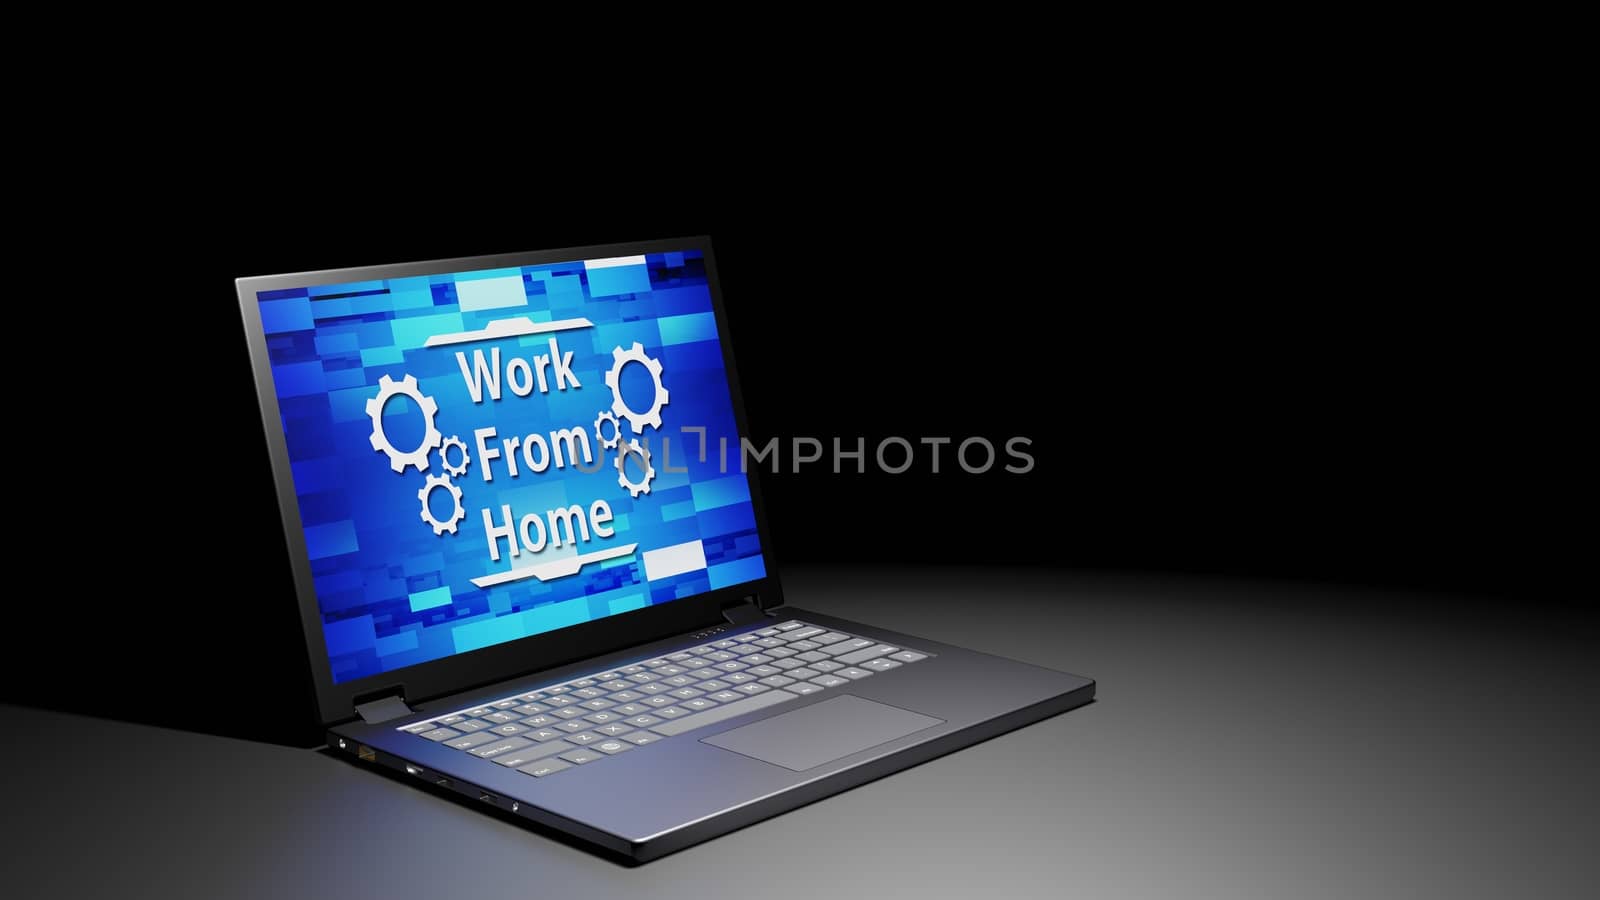 8K 3D rendered isolated Laptop with Work From Home Abstract Screen Display on the floor in the Dark room with one light source (Left side)